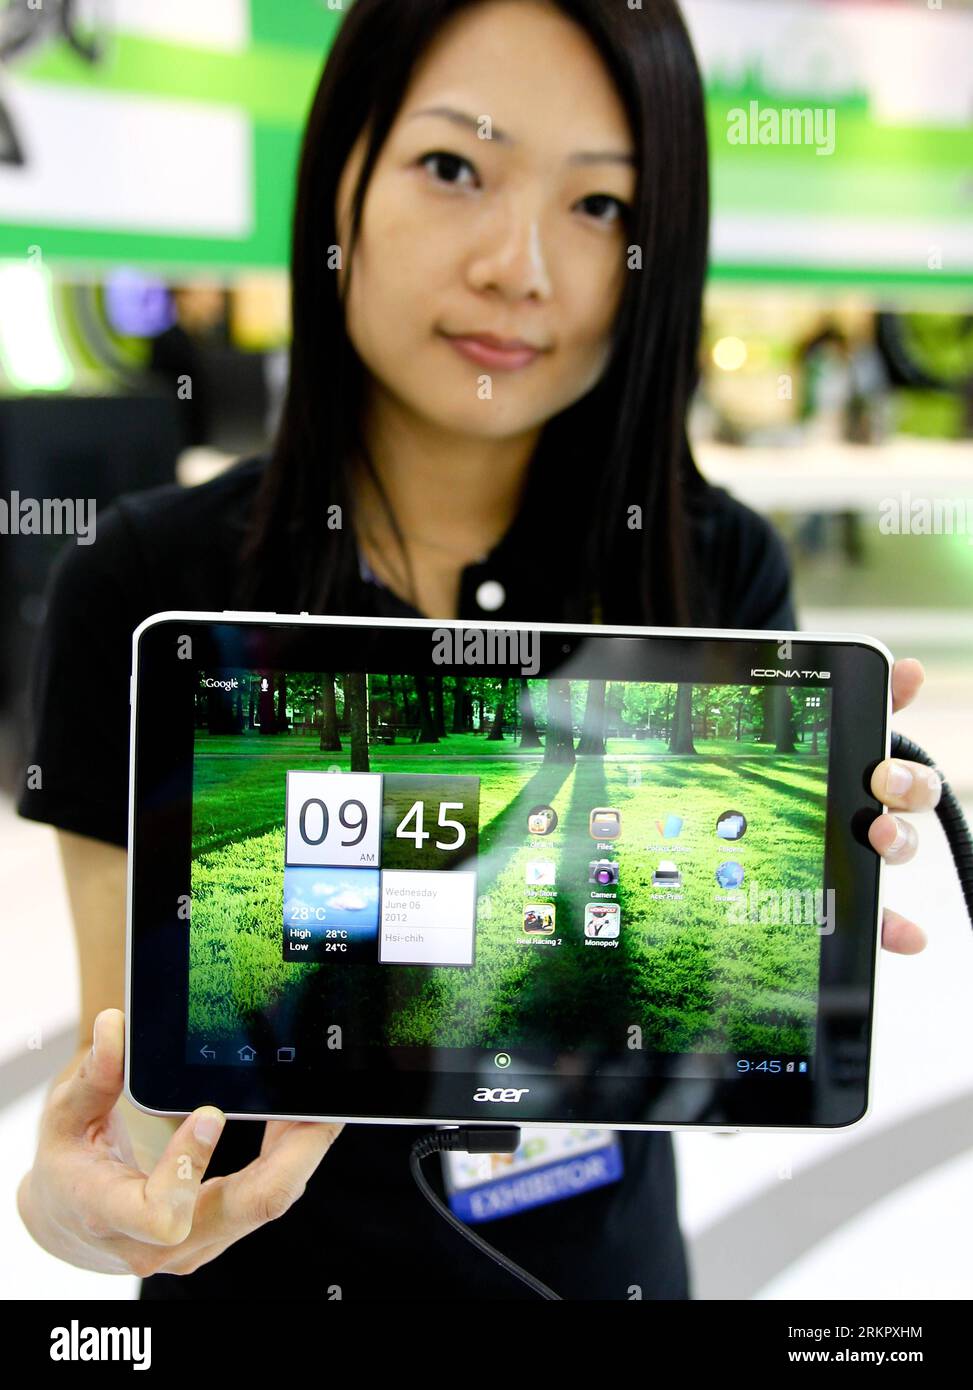 Bildnummer: 58071996  Datum: 05.06.2012  Copyright: imago/Xinhua (120605) -- TAIPEI, June 5, 2012 (Xinhua) -- A staff member of Acer displays a tablet computer during the Computex 2012 in Taipei, southeast China s Taiwan, June 5, 2012. The exhibition, kicking off on Tuesday, will last until June 9. About 1,800 exhibitors come to showcase their latest products. (Xinhua/Hou Dongtao) (lfj) CHINA-TAIPEI-COMPUTEX-EXHIBITION (CN) PUBLICATIONxNOTxINxCHN Wirtschaft Messe Computermesse premiumd xbs x2x 2012 hoch o0 PC, Iconia Tab     58071996 Date 05 06 2012 Copyright Imago XINHUA  Taipei June 5 2012 X Stock Photo